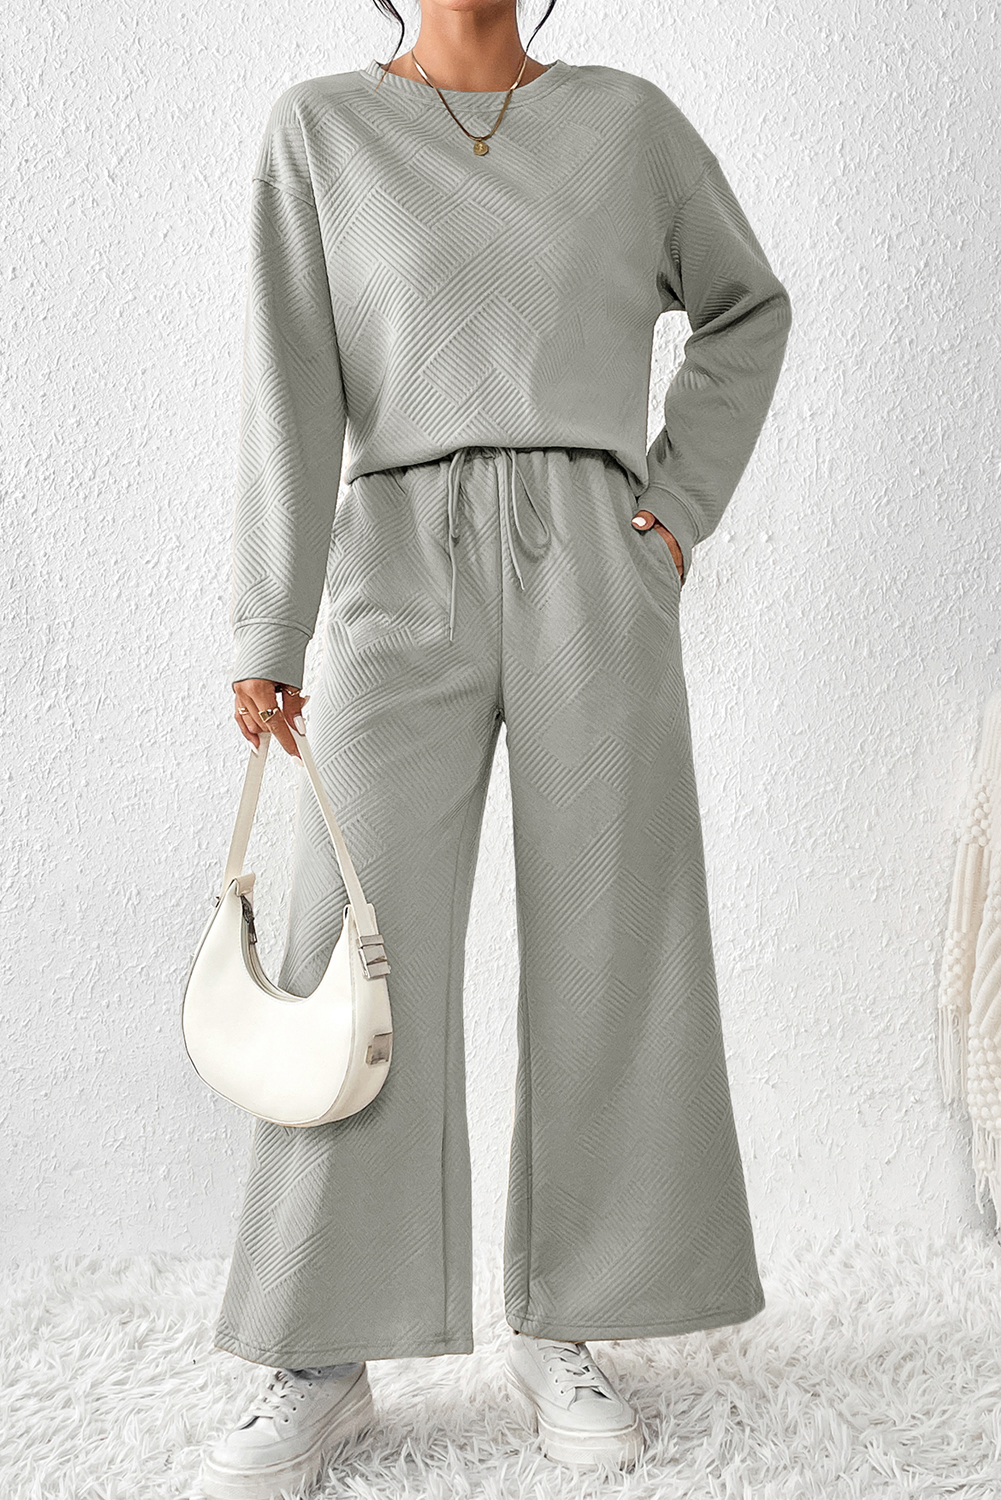 Shewin Wholesale WESTERN Gray Textured Loose Slouchy Long Sleeve Top and Pants Set